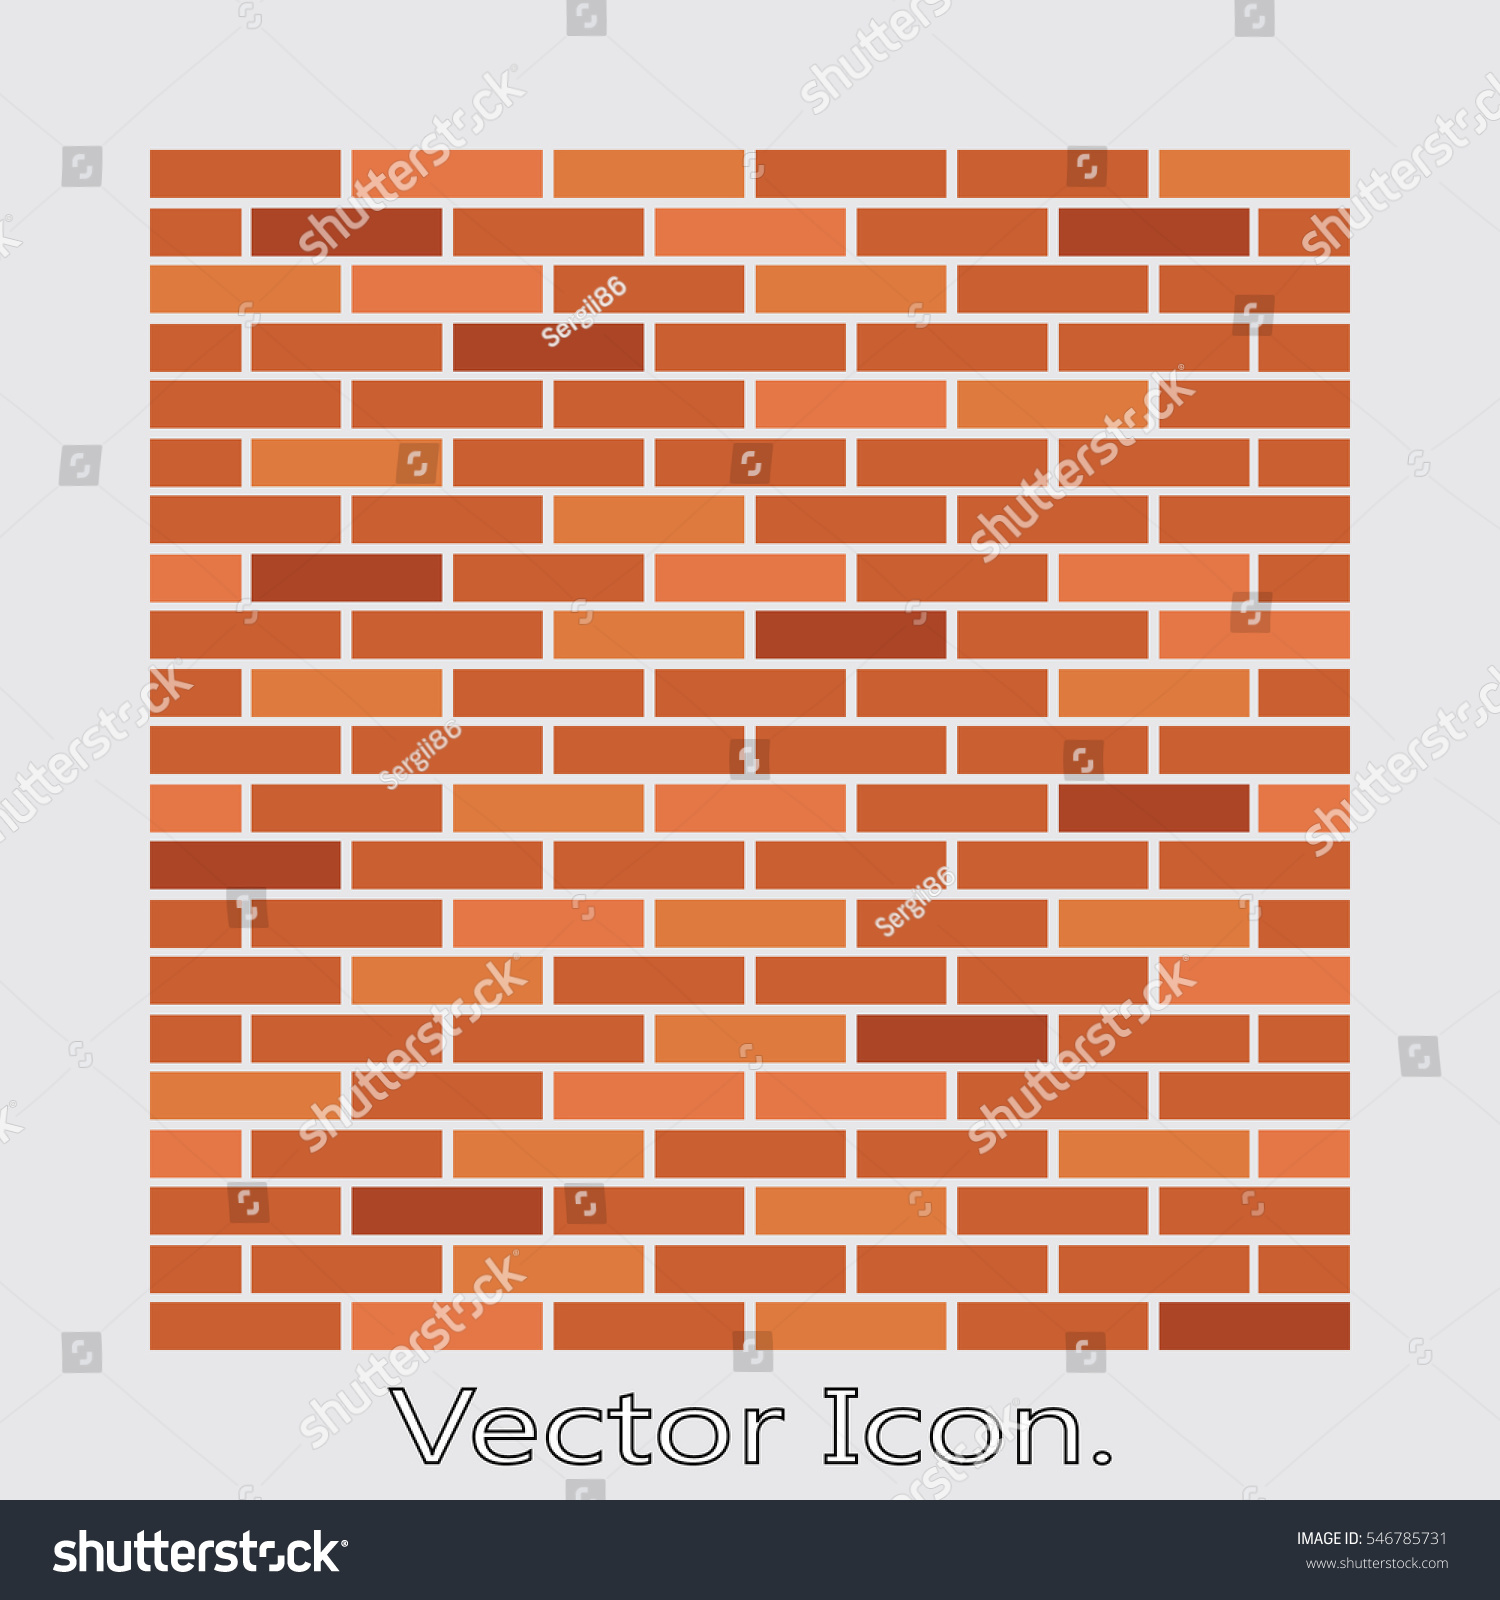 SVG of Brick work Icon isolated of flat style. Vector illustration. svg